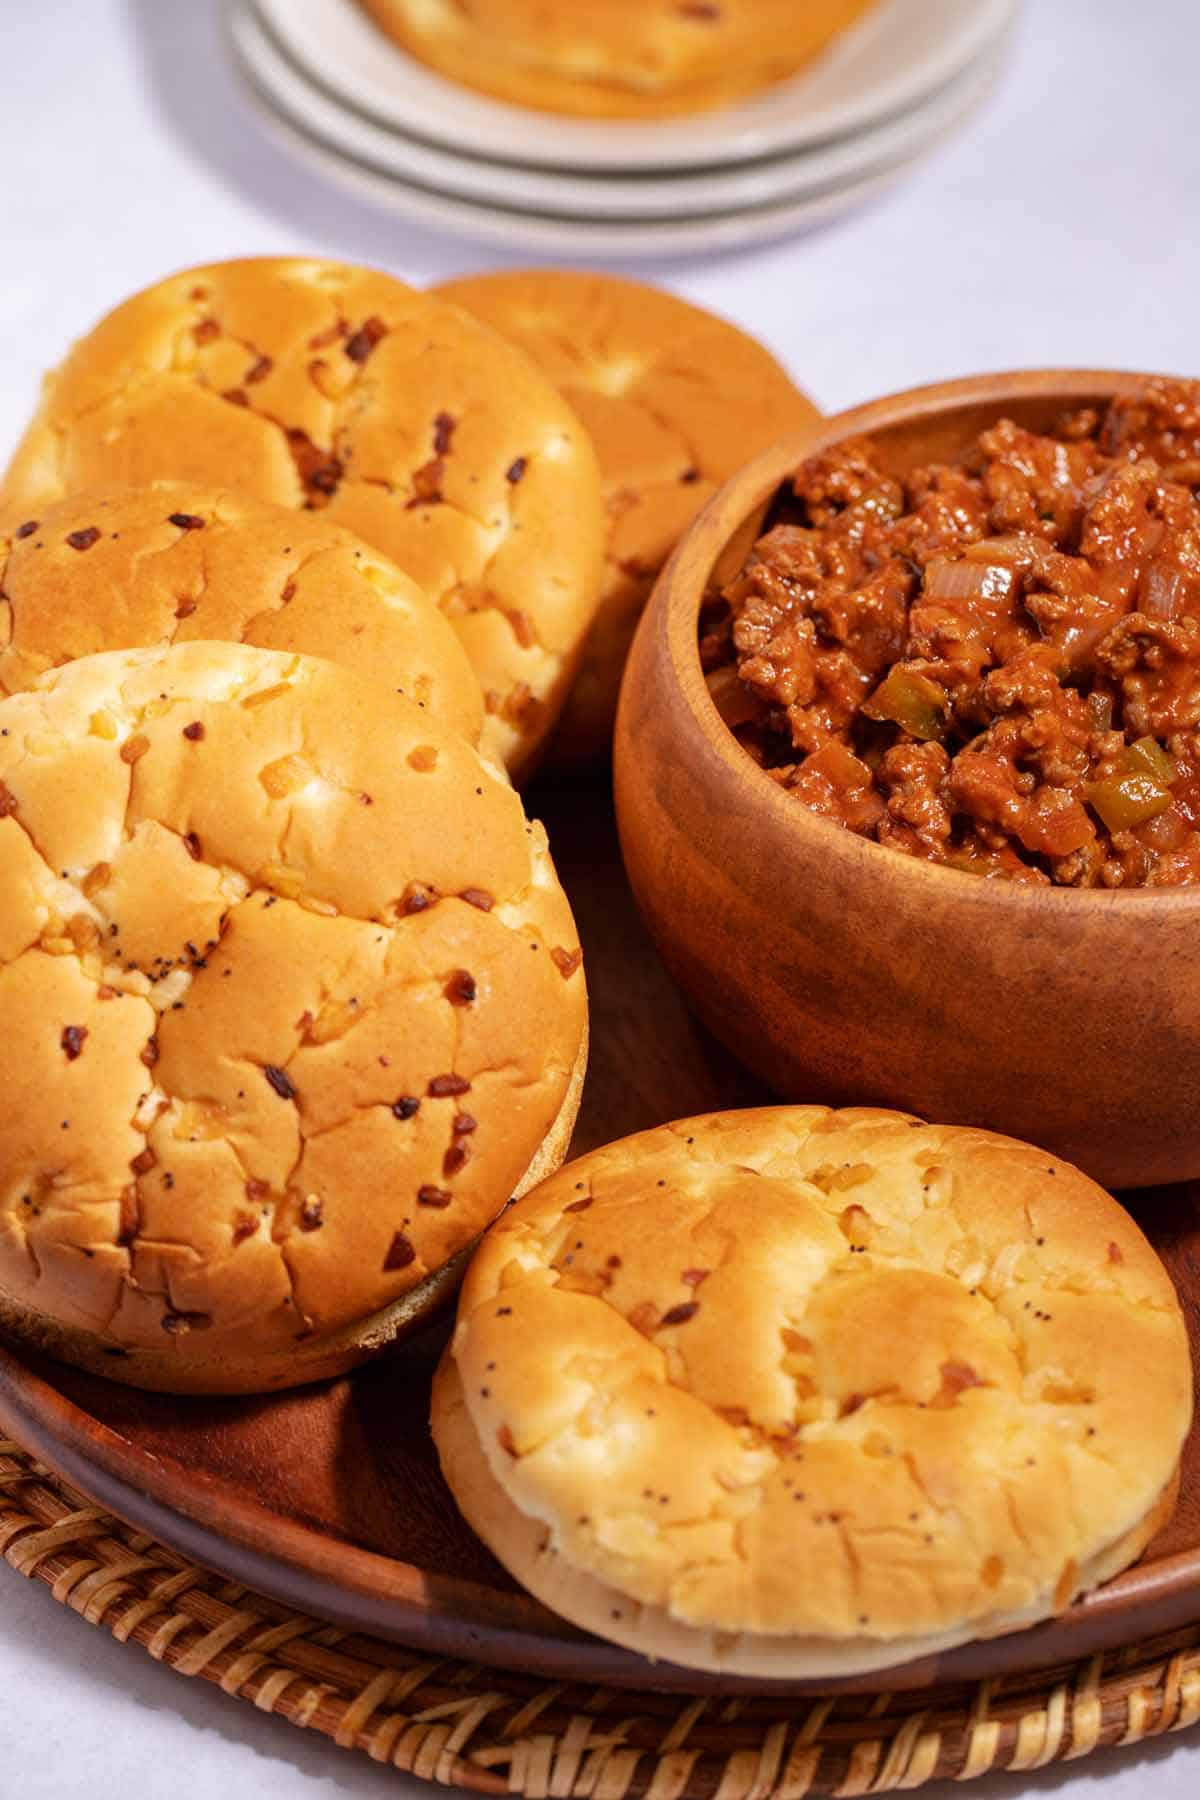 Plate of onion buns and bowl of sloppy joes.